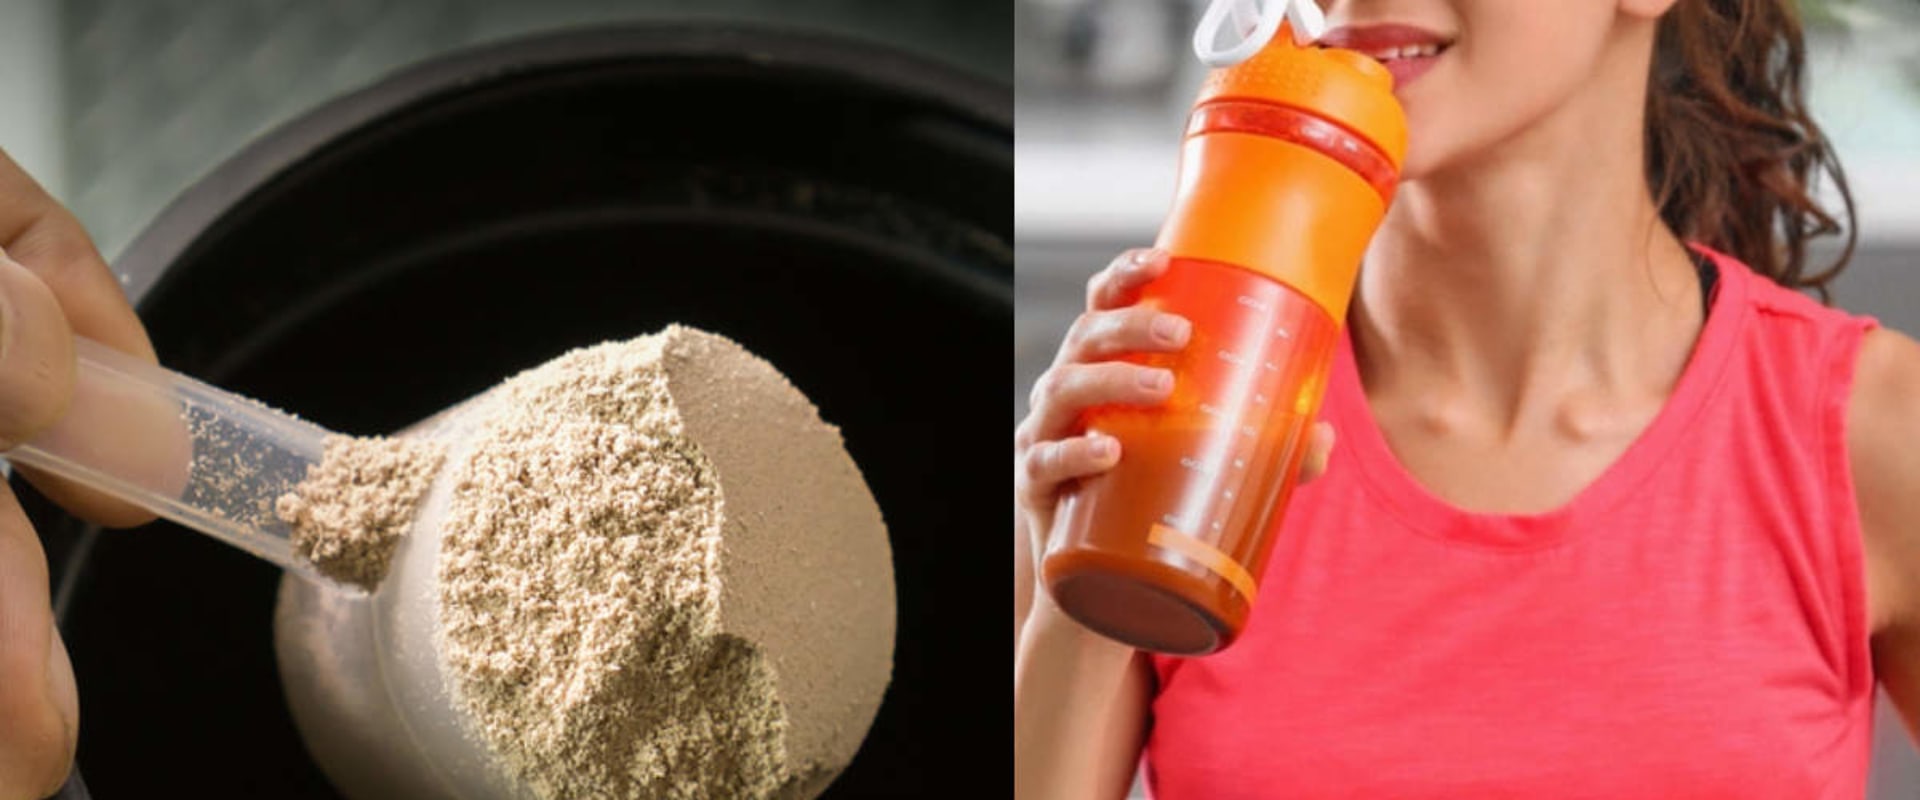 Is 50g of Protein Too Much? An Expert's Perspective